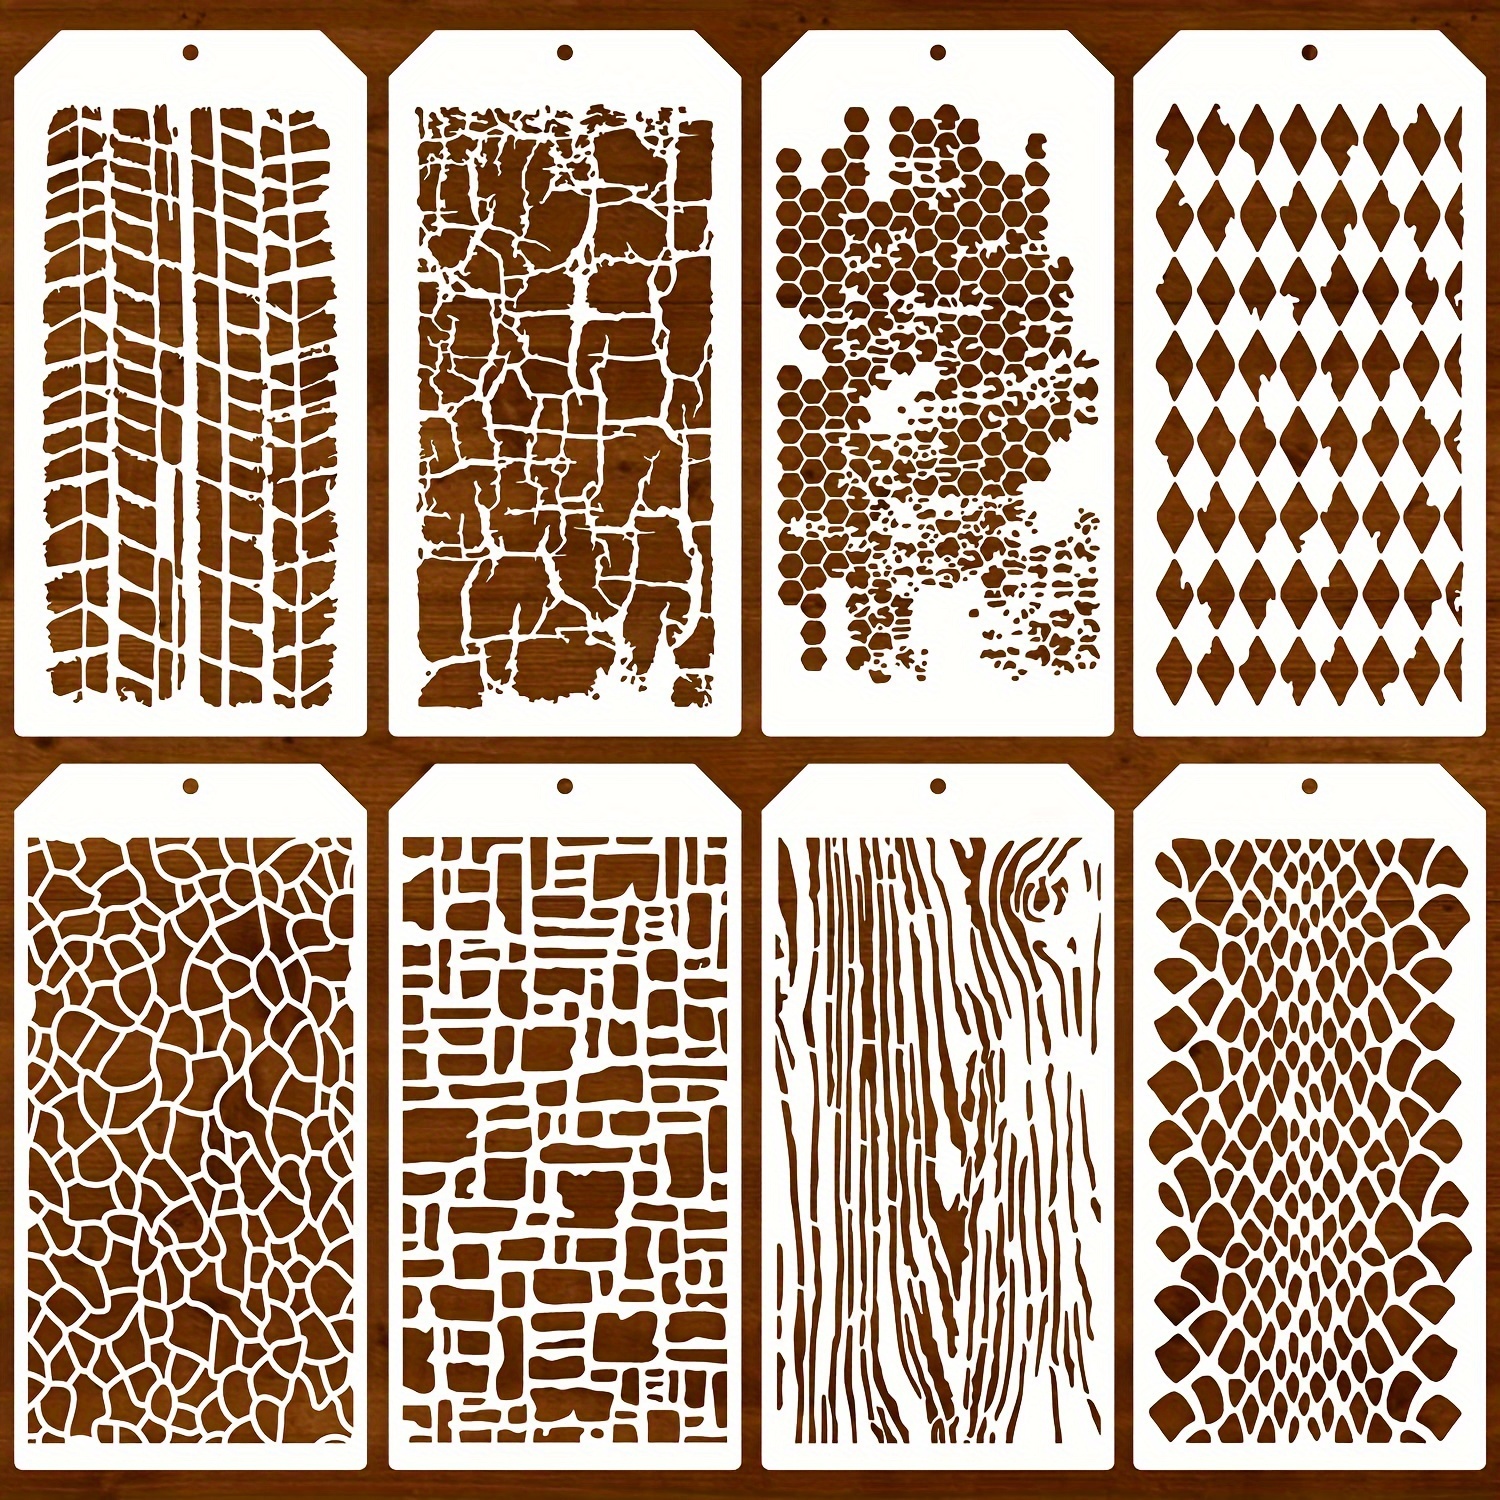 

8pcs Stencils For Crafts, Leopard Brick Dot Layering Stencils For Crafts Reusable Texture Stencils Mixed Media Stencil Layering Drawing Templates For Painting On Wood Crafts Furniture Paper